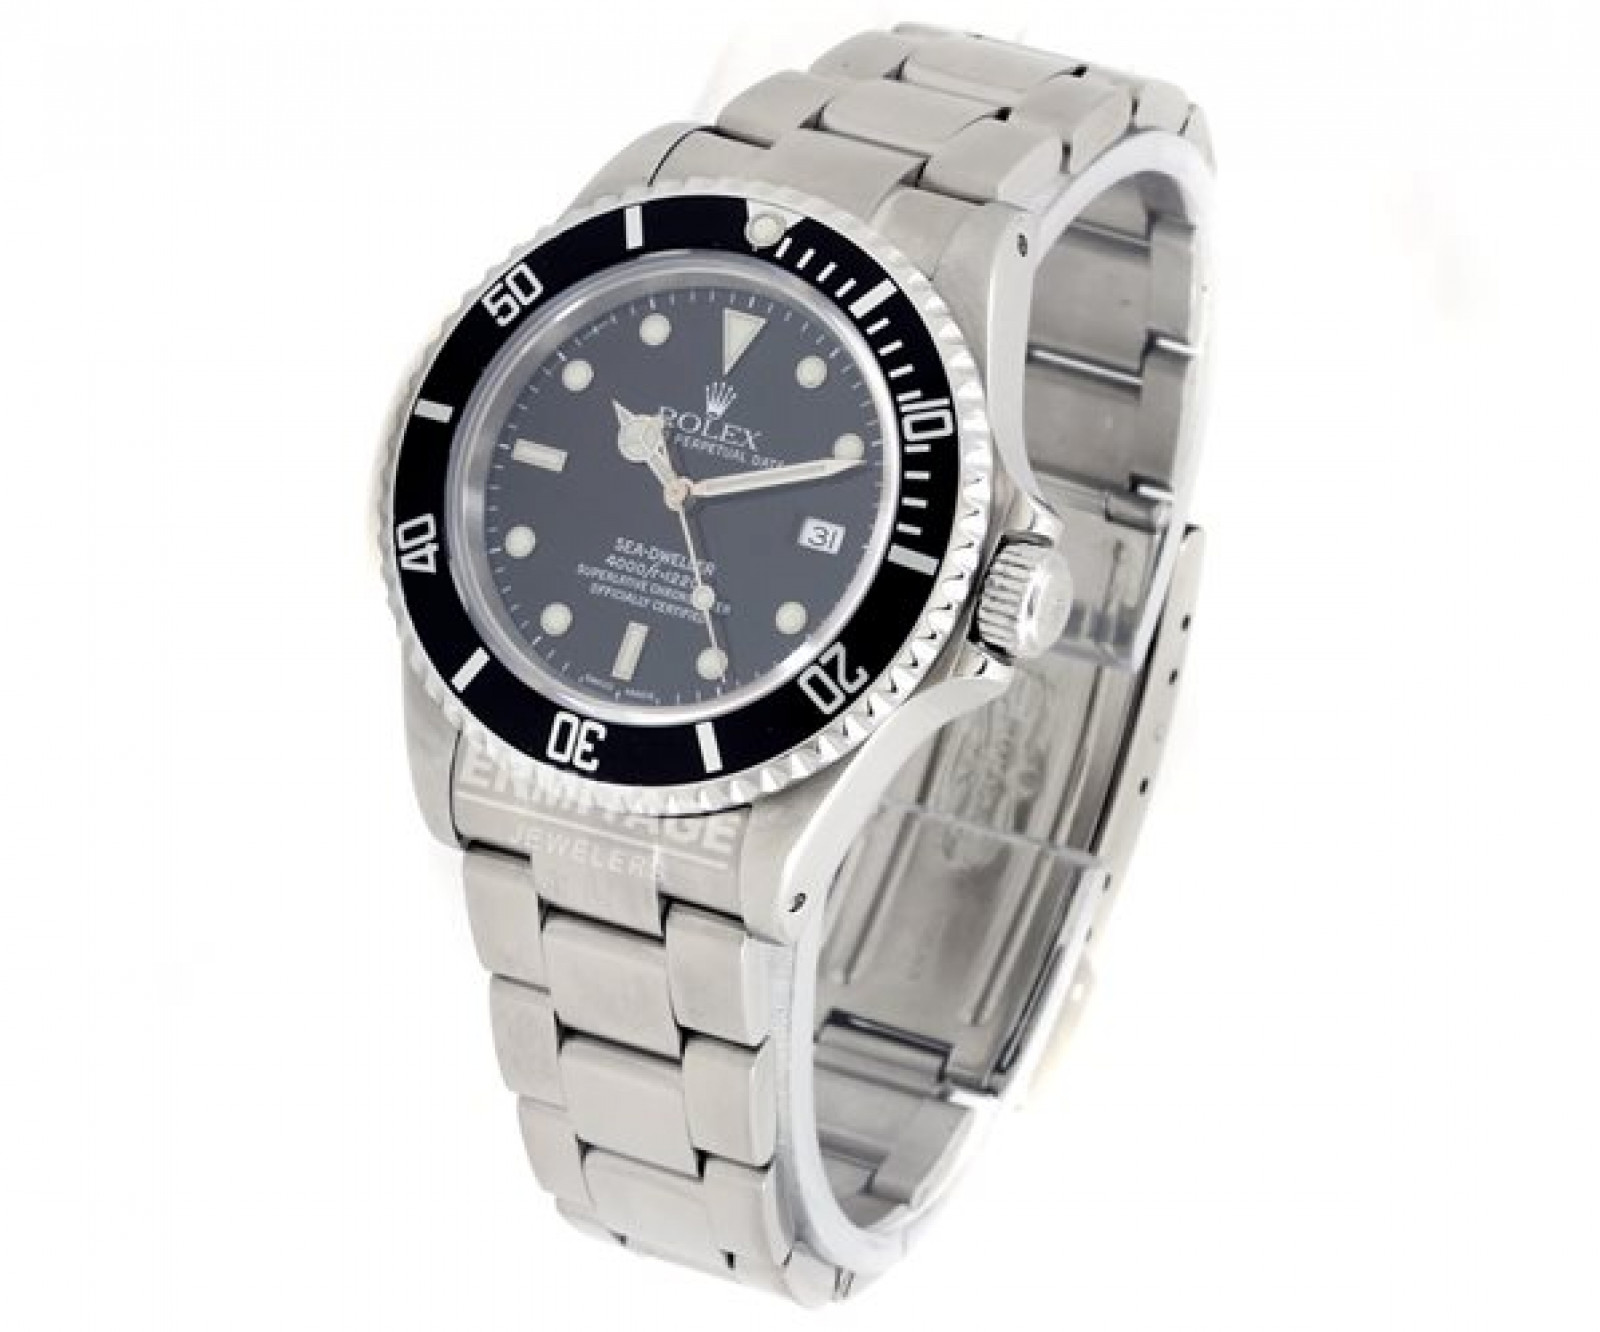 Pre-Owned Rolex Sea-Dweller 16600 Stainless Steel